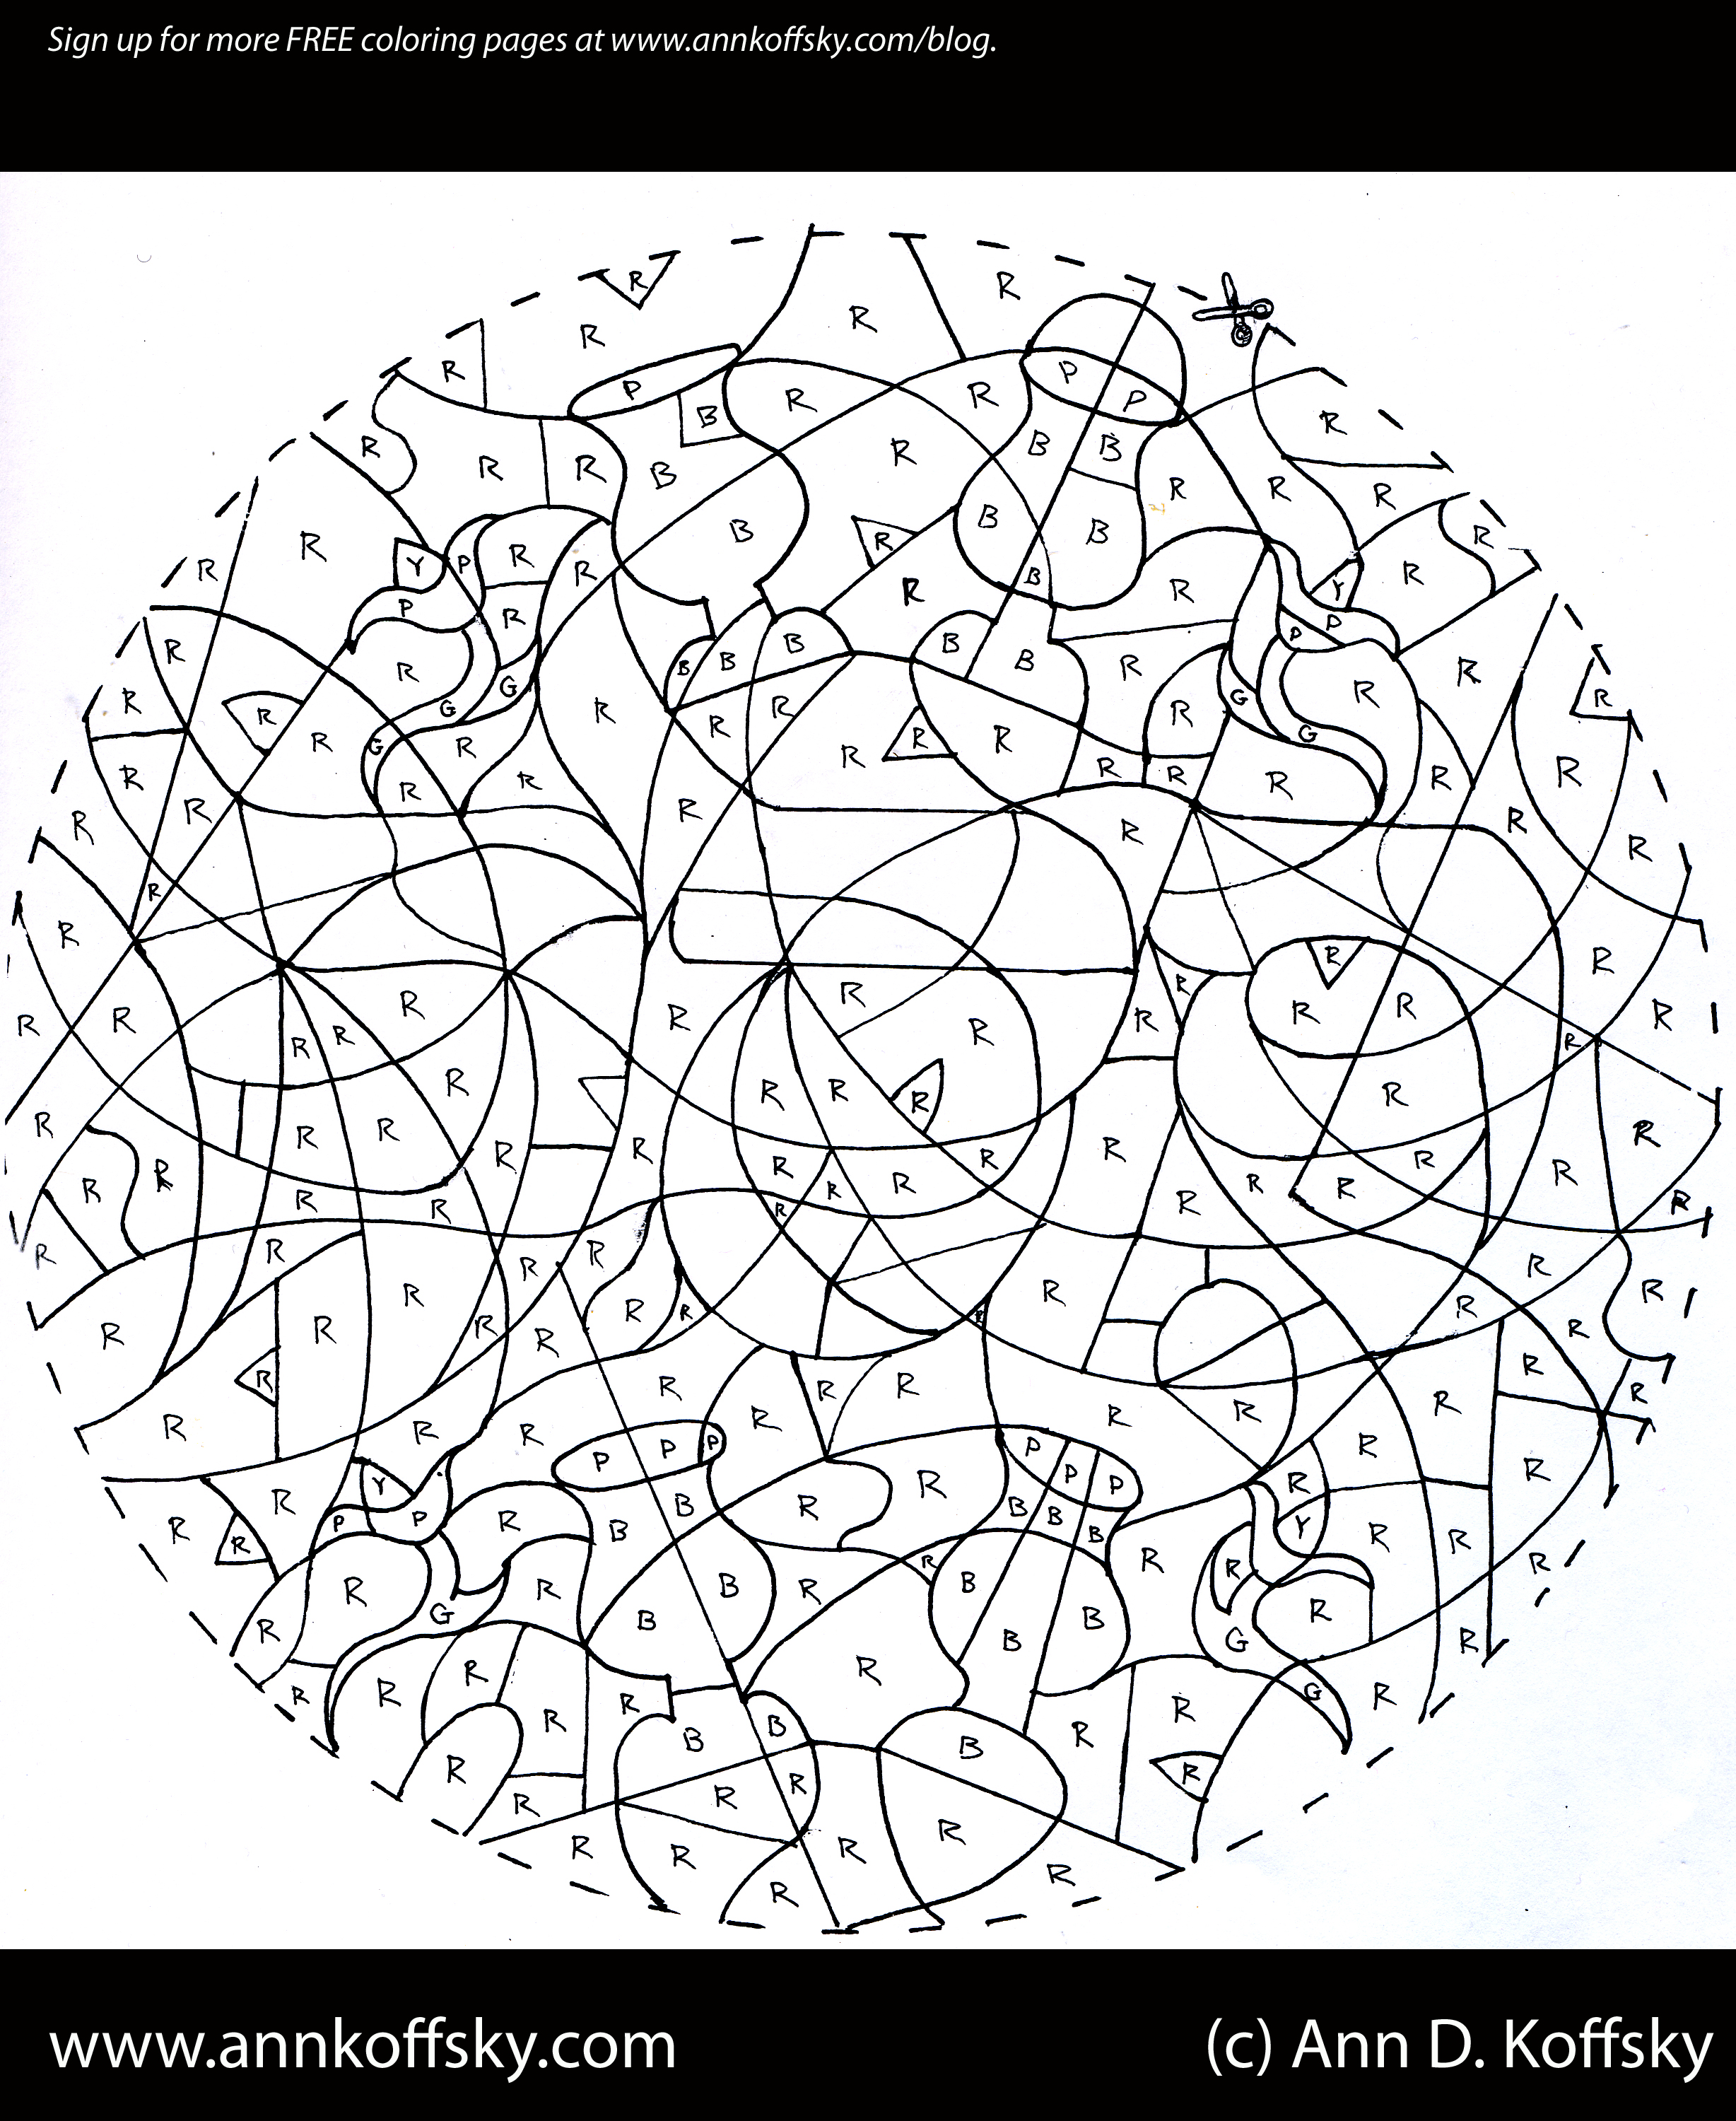 Passover coloring page â ann d koffsky